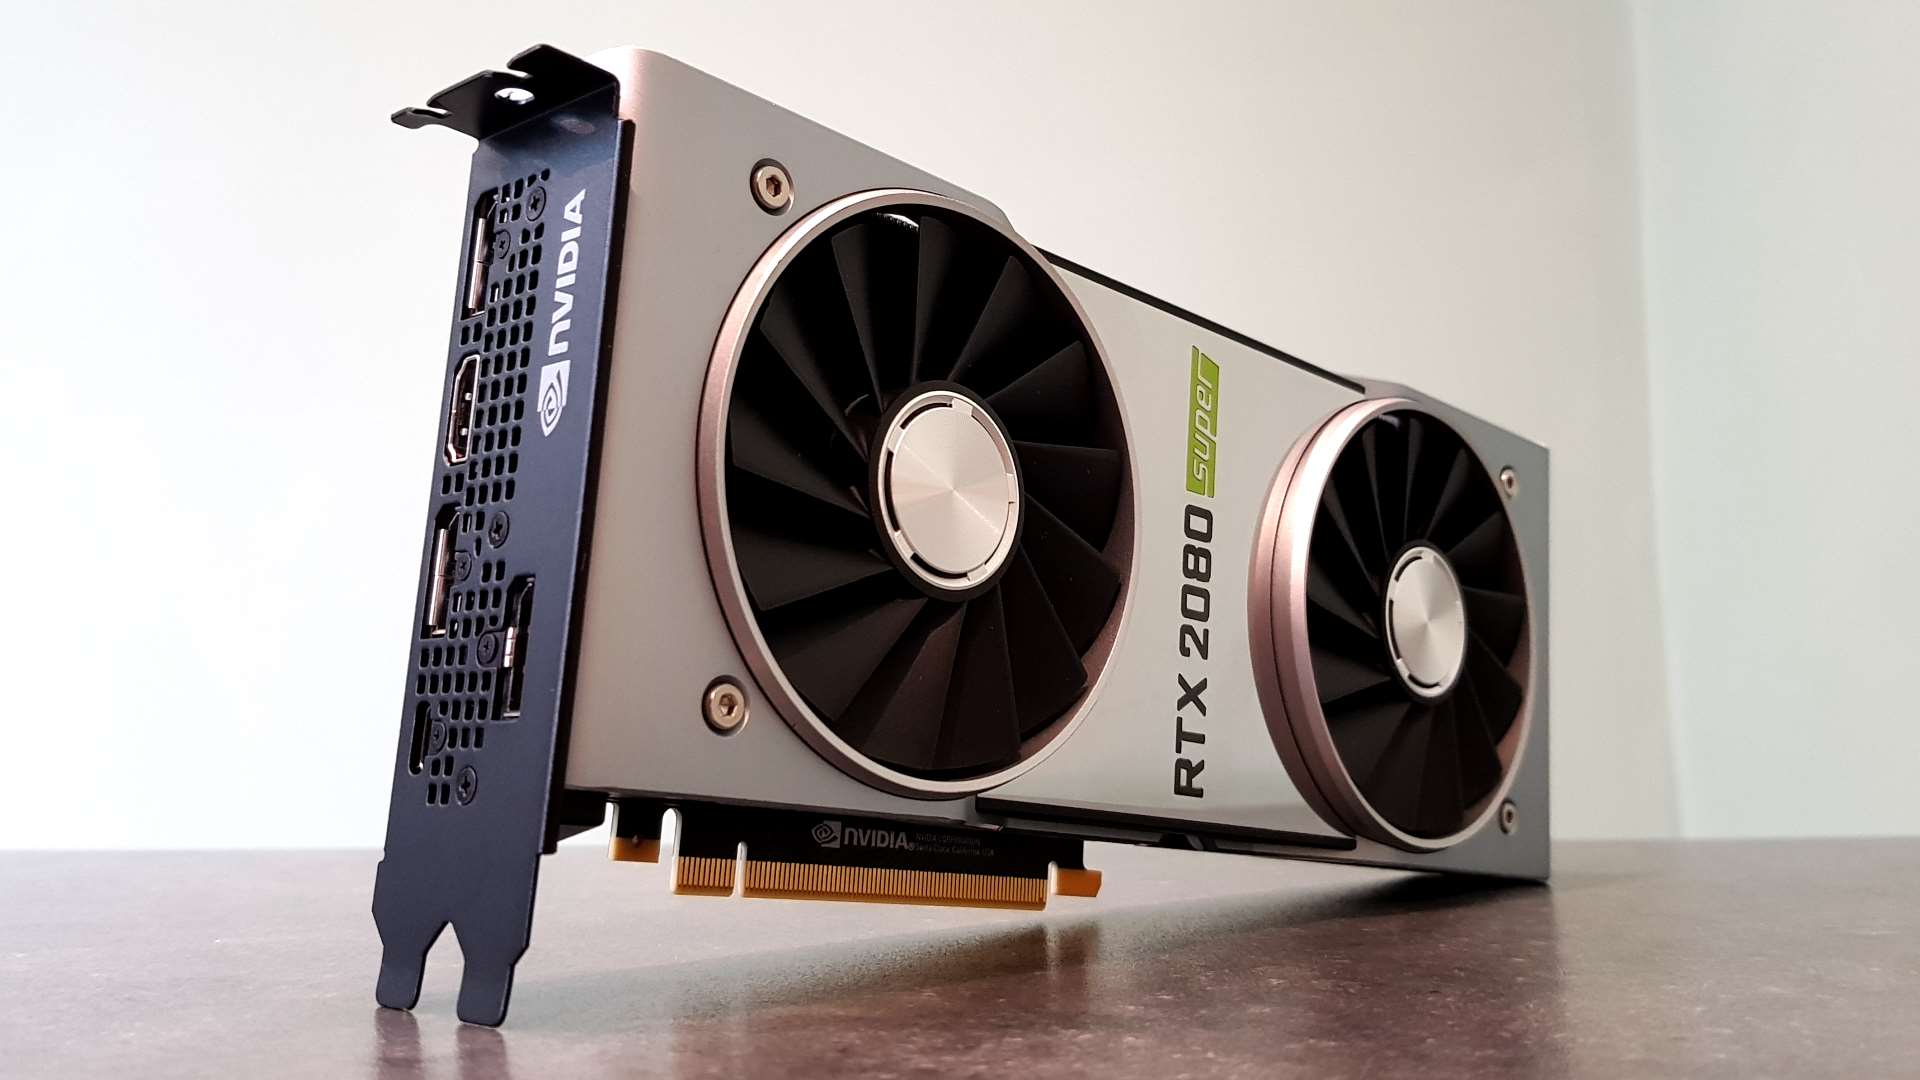 Nvidia RTX 2080 Super review: the 2070 Super has stolen its Turing